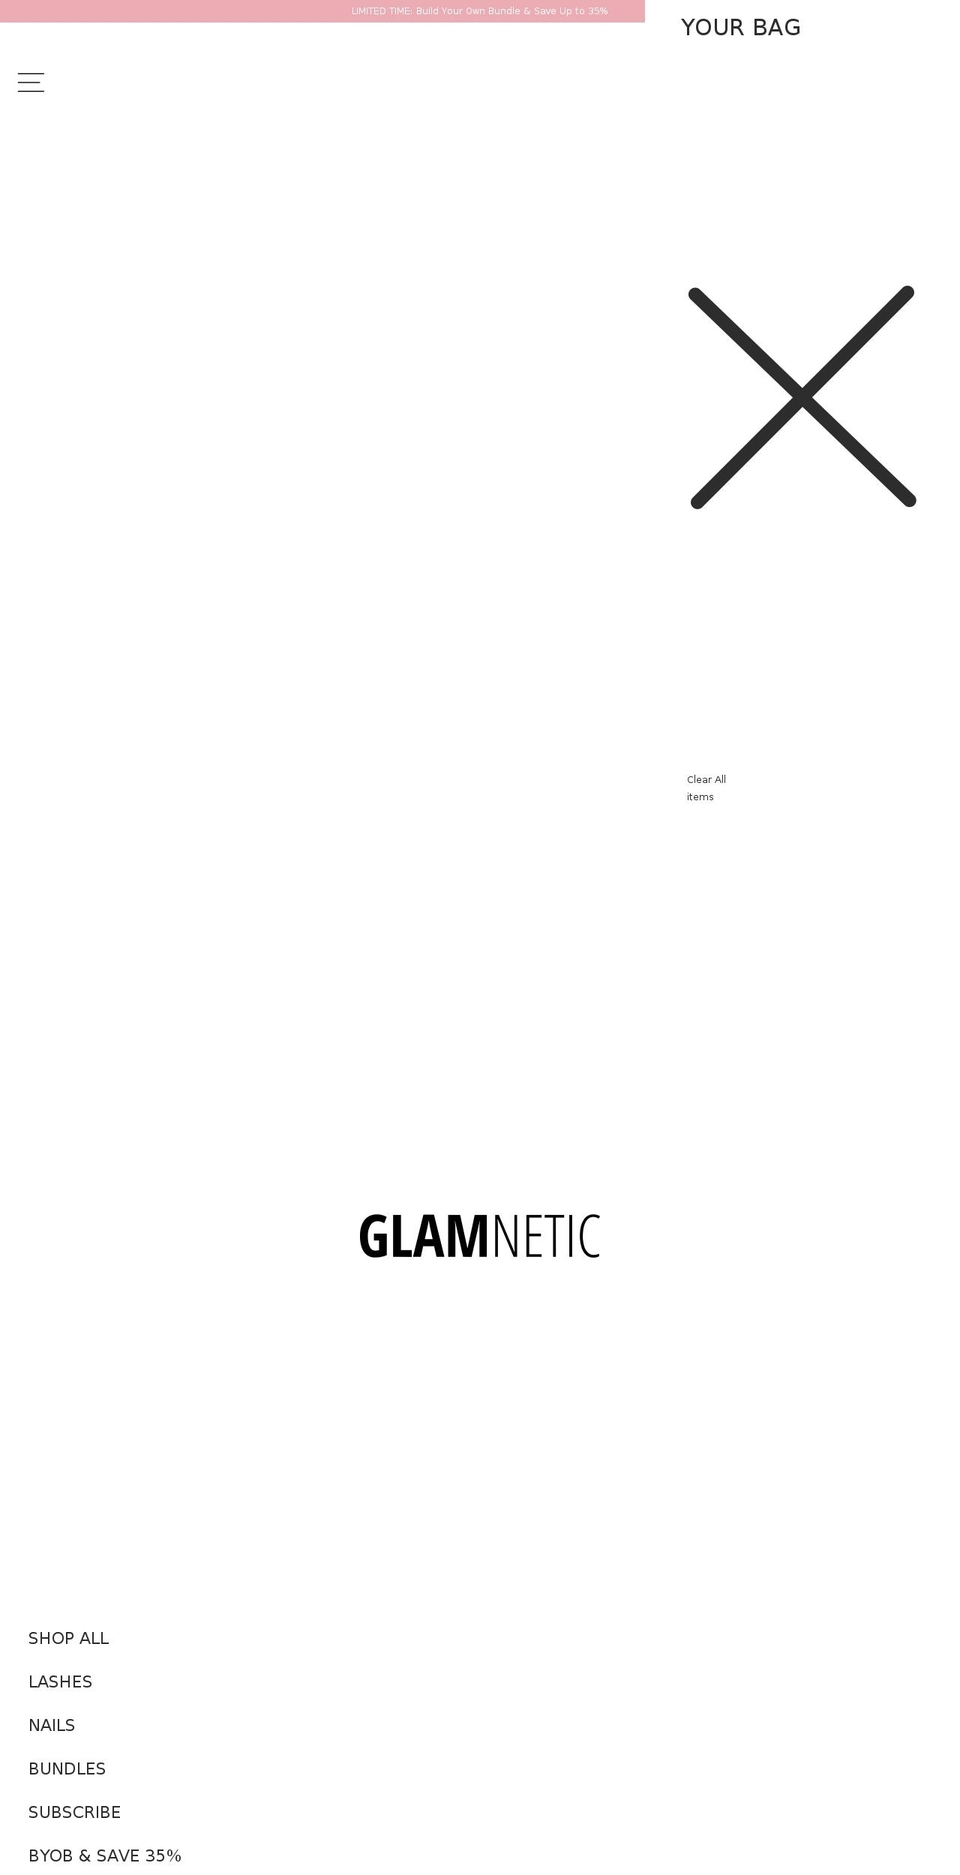 glam Shopify theme site example glamnetic.com